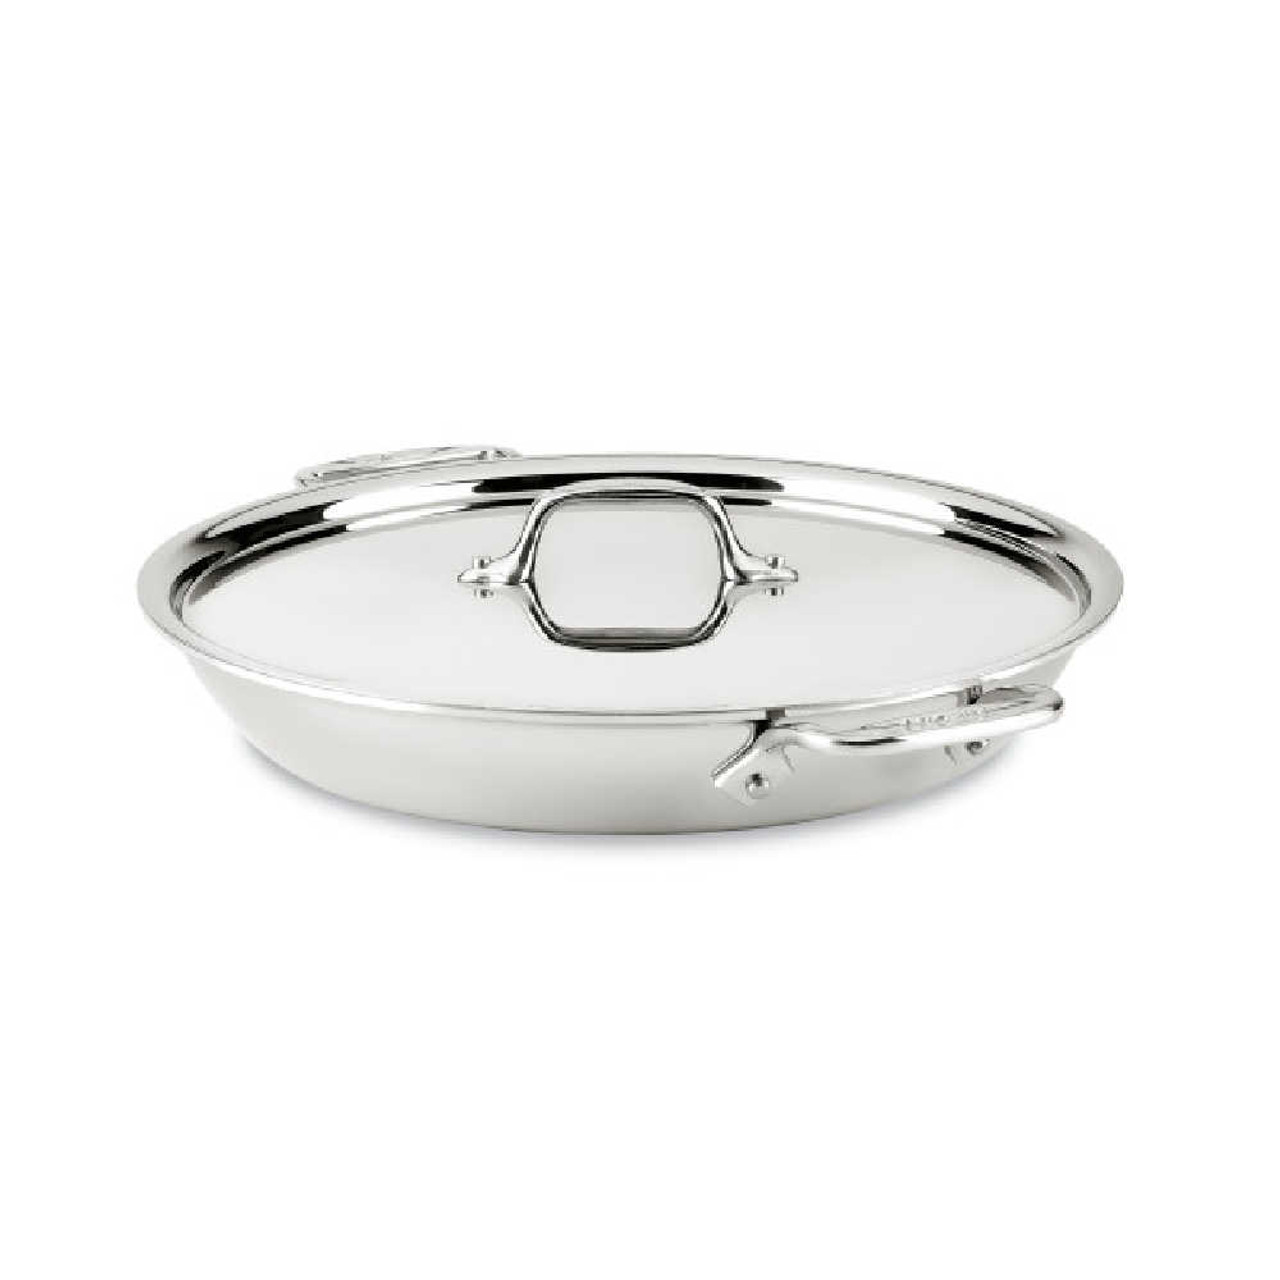 All-Clad D3 3-Qt. Universal Stainless Steel Pan